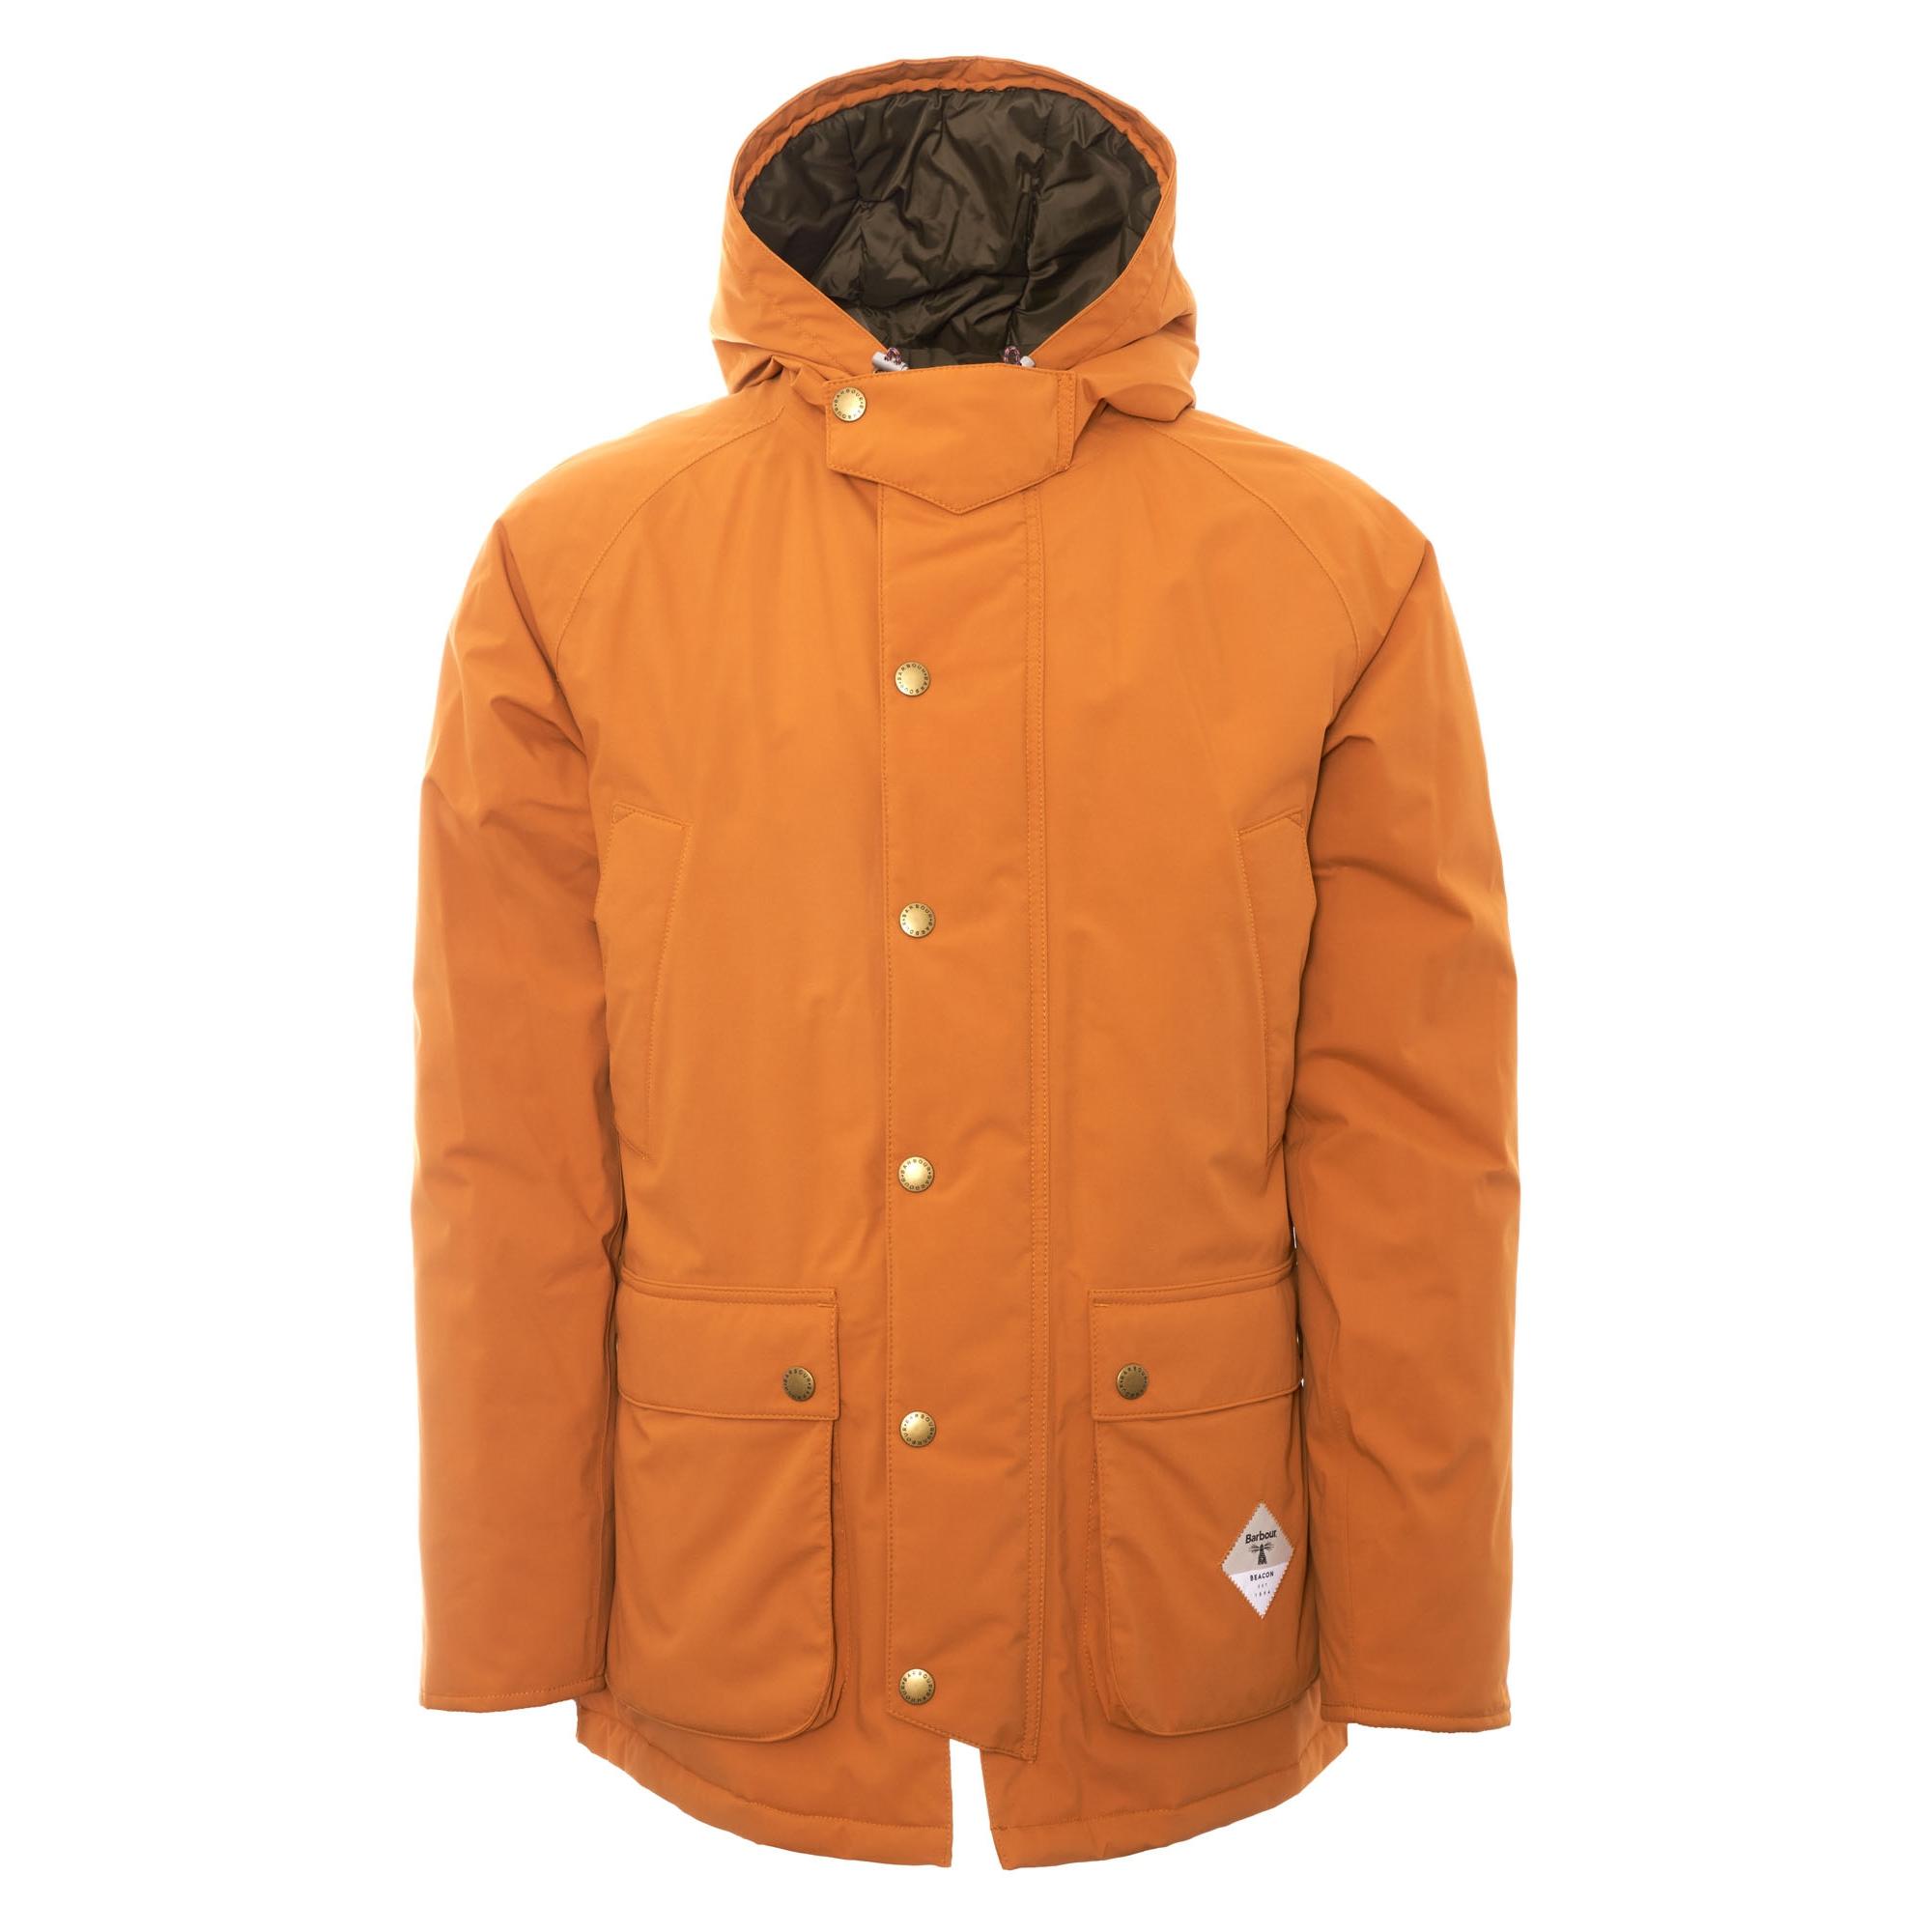 barbour beacon fell jacket cinder